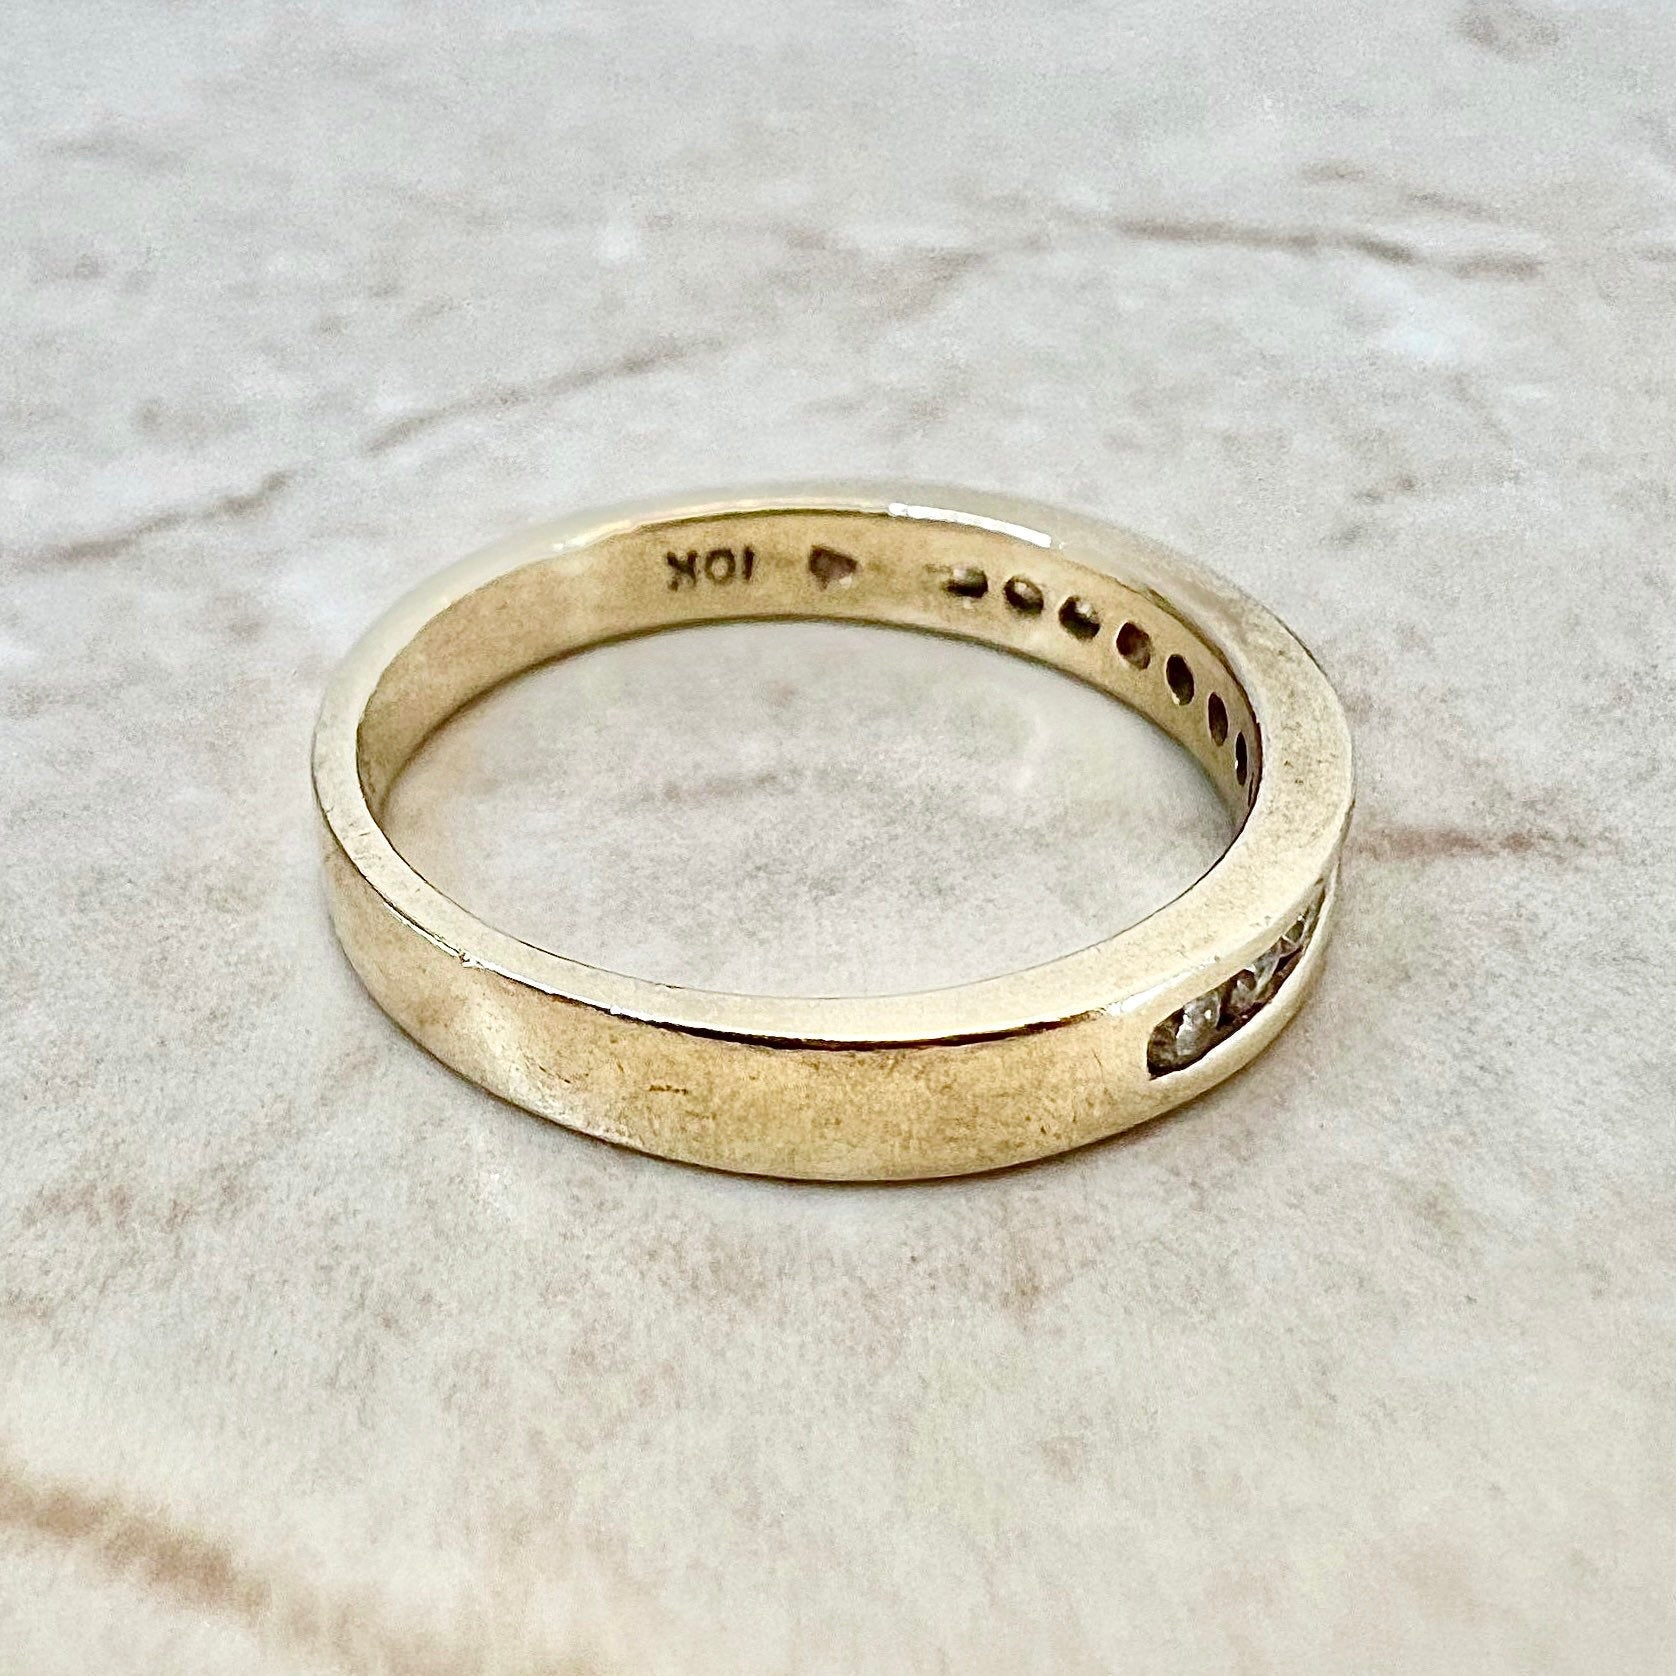 10K Half Eternity Diamond Band Ring - Yellow Gold Wedding Band - Channel Set Band - Anniversary Ring - Birthday Gift - Best Gift For Her